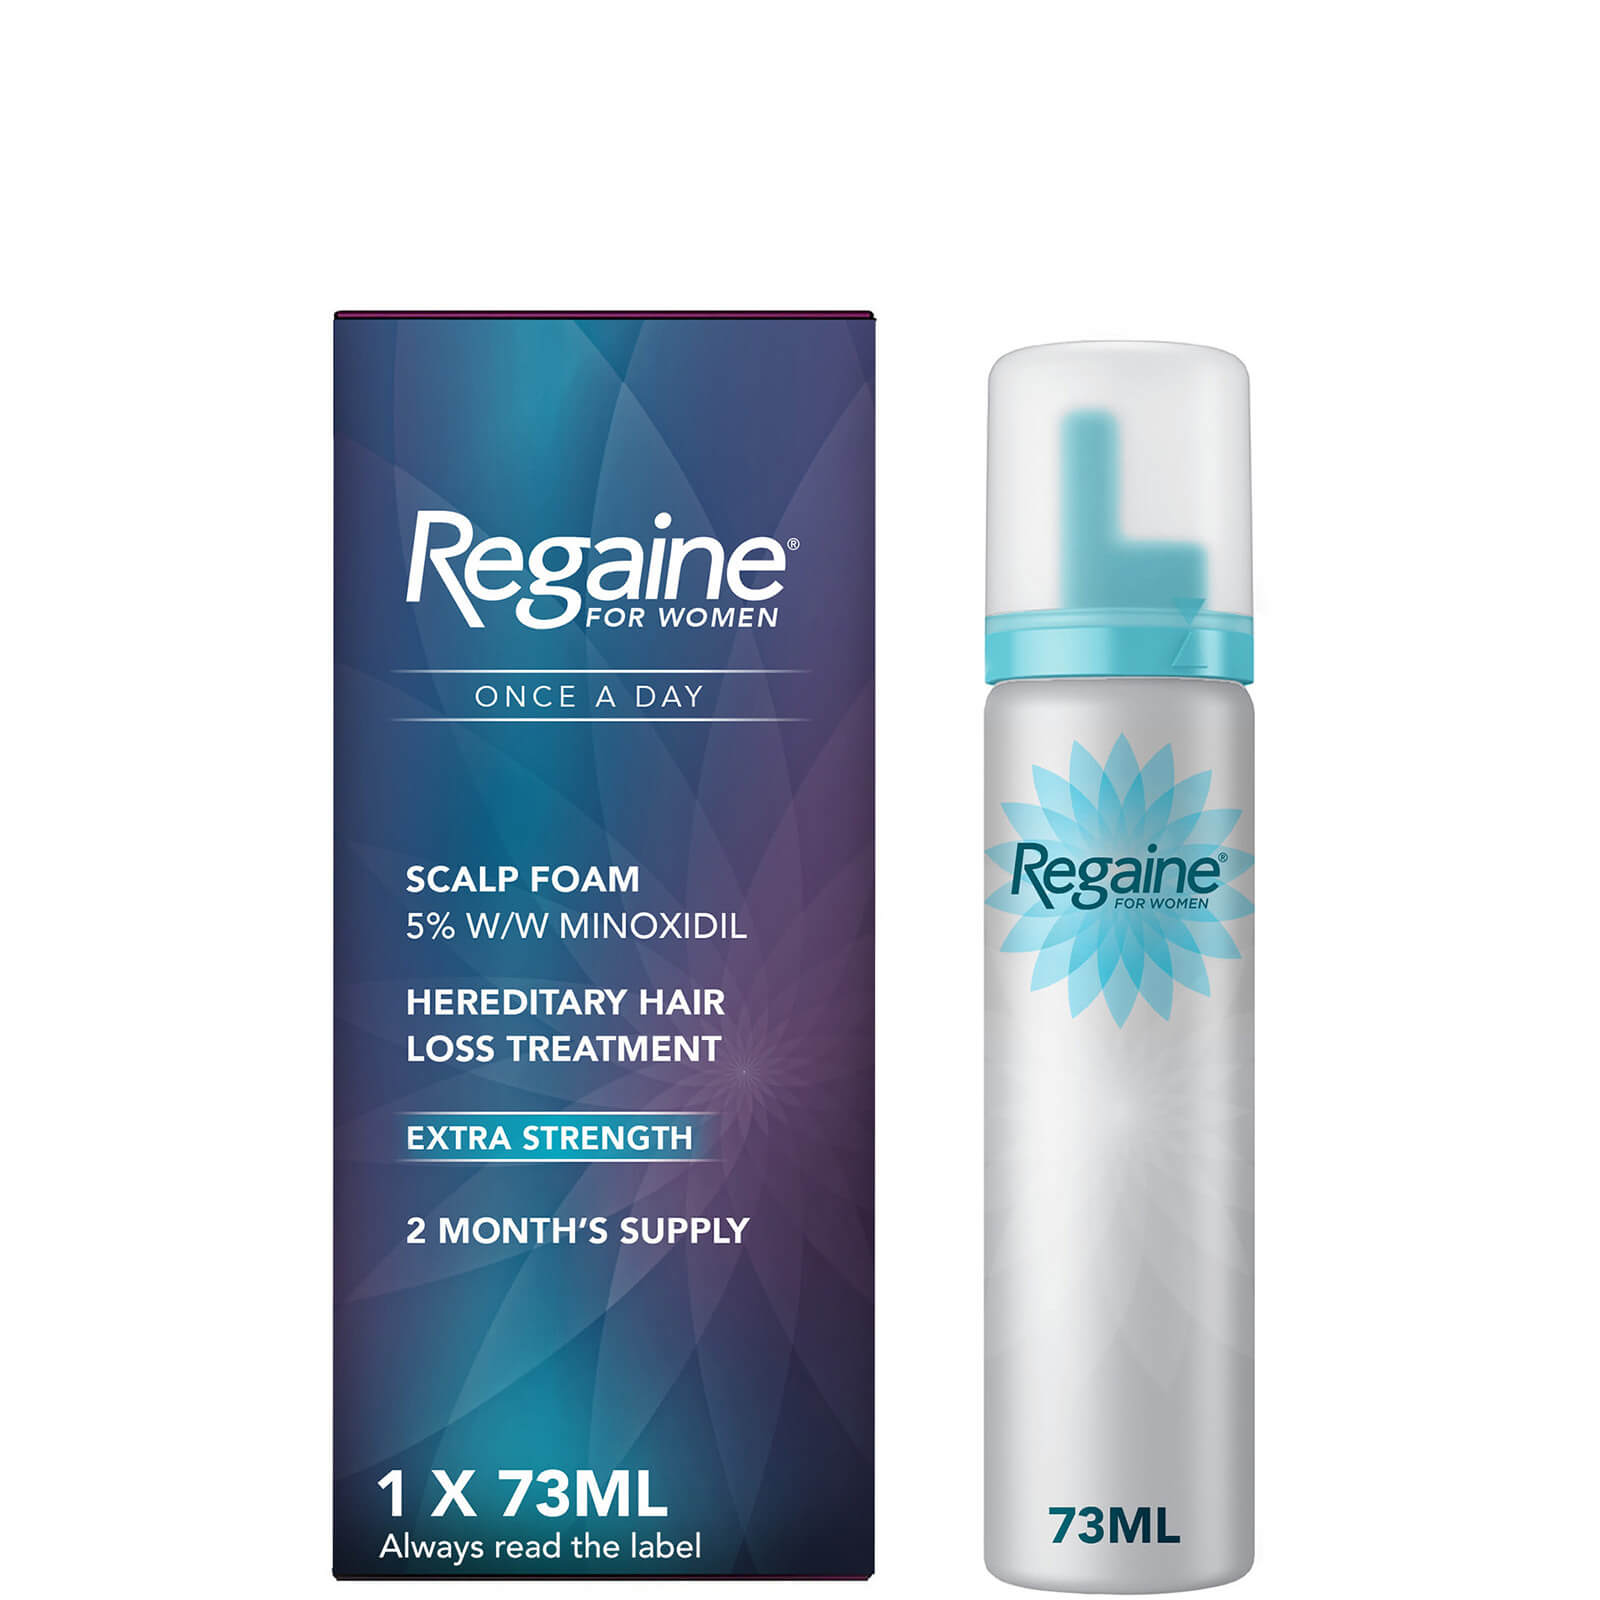 Regaine Women`s Once A Day Hair Loss and Regrowth Scalp Foam Treatment with Minoxidil 60g lookfantastic.com imagine